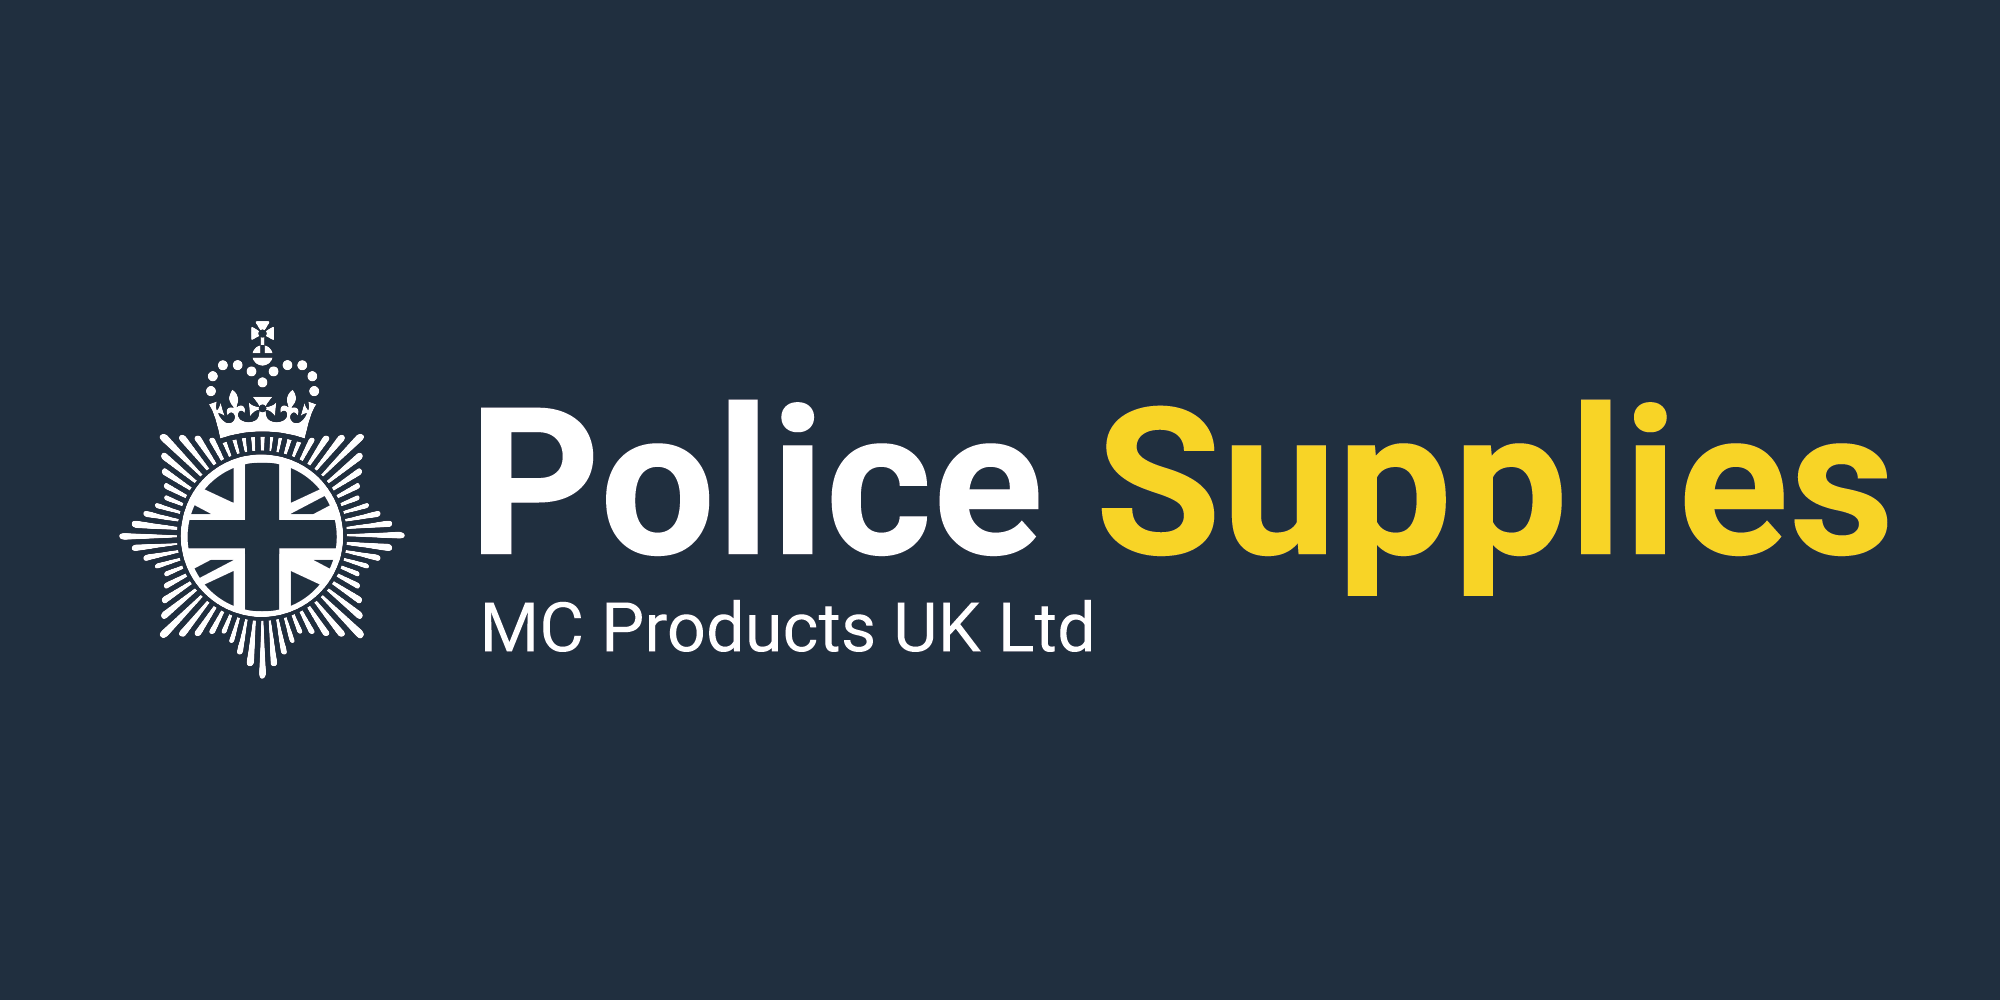 (c) Police-supplies.co.uk